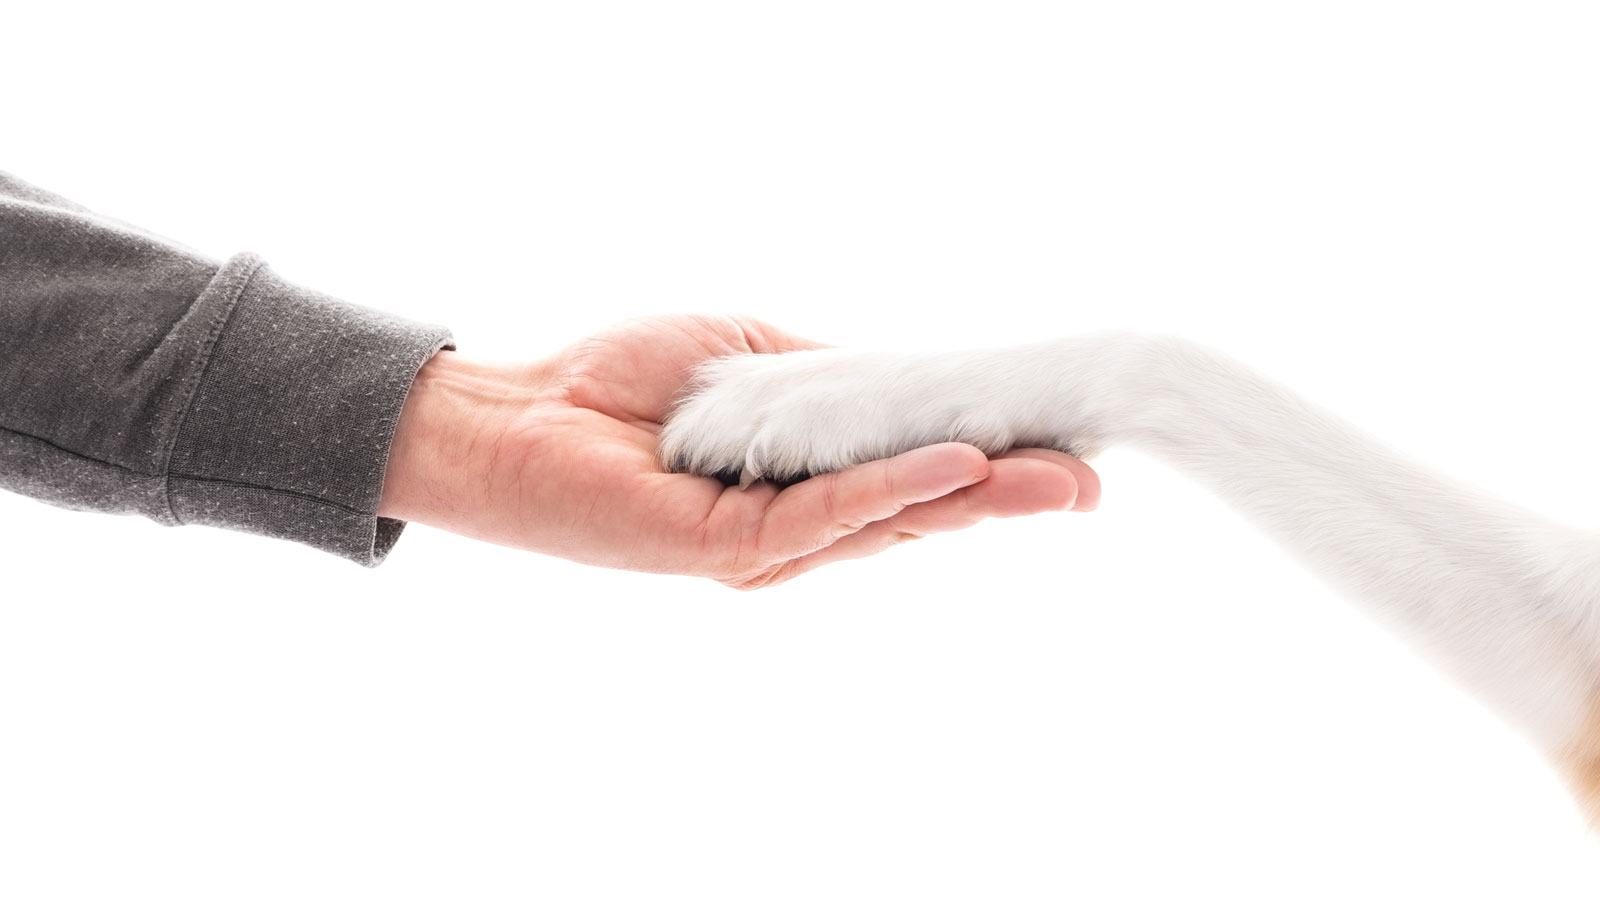 Dog and Human as friend and partner, hand and paw on each other